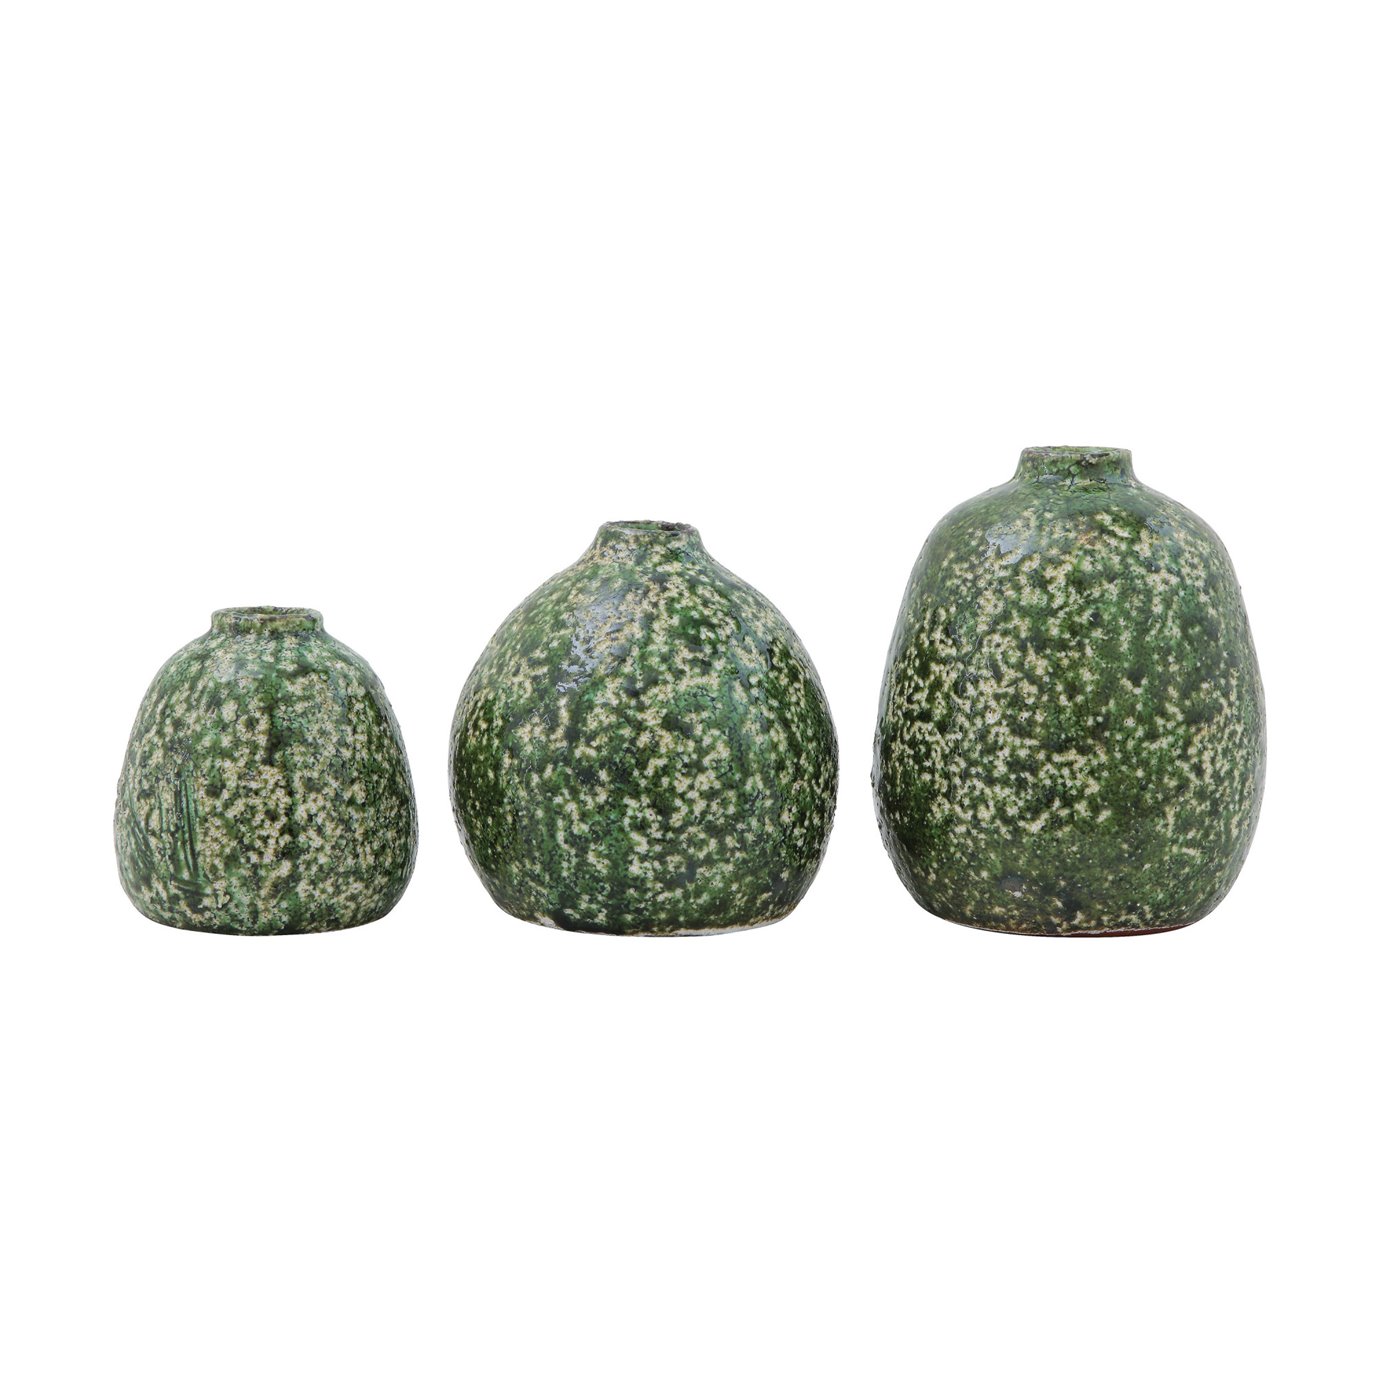 Distressed Green Terracotta Vases (Set of 3 Sizes)